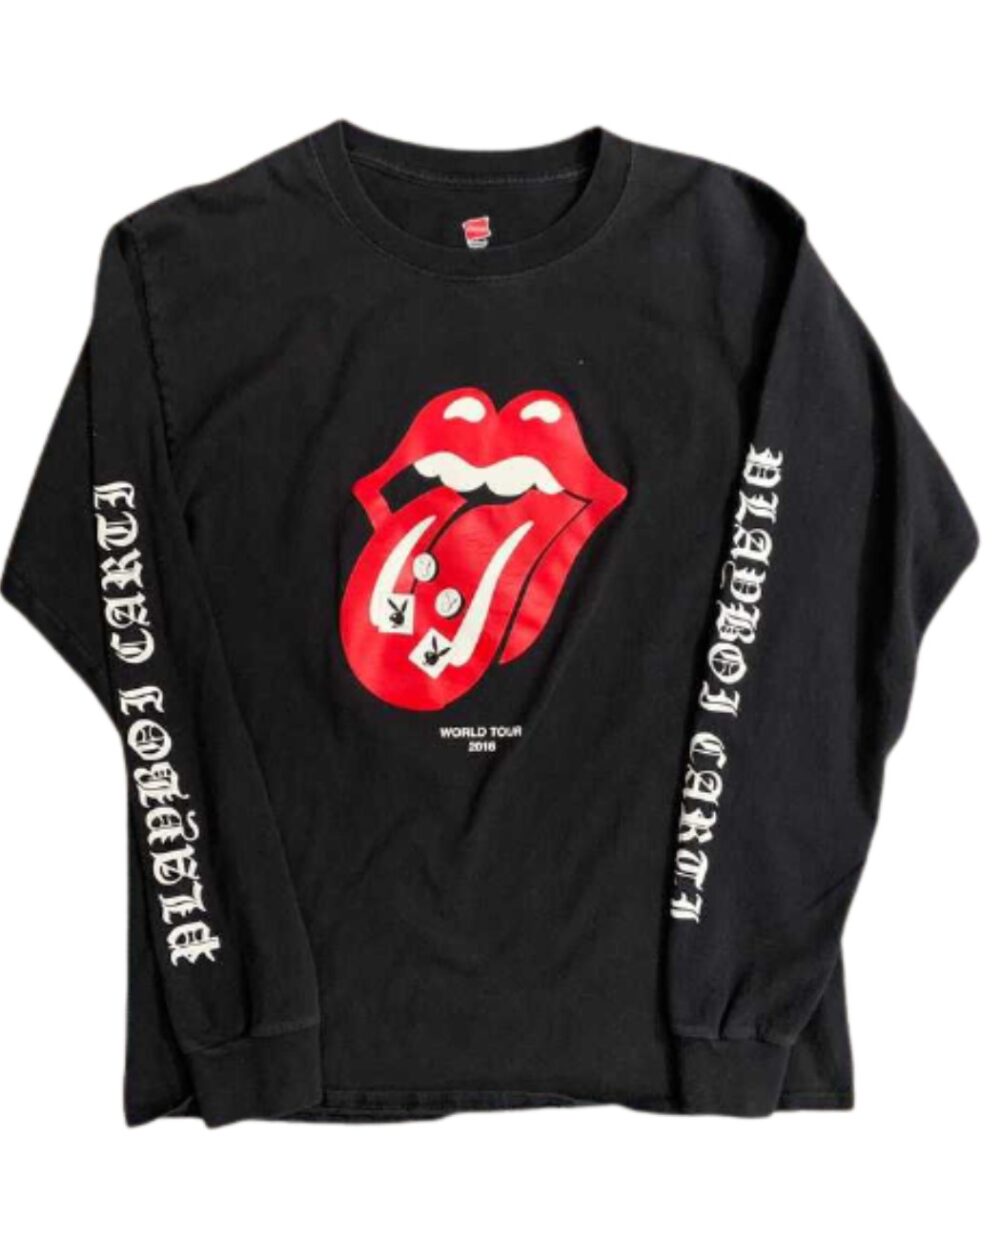 Artist Collaboration: Playboi Carti x Rolling Stones Long Sleeve Color: Black Design: Rolling Stones graphic Material: High-quality fabric blend Fit: Comfortable and stylish Sizes: Available in various sizes Style: Fusion of Carti's urban flair and Rolling Stones' iconic imagery Statement Piece: Showcase your connection to both Carti and Rolling Stones Versatile: Suitable for bold and music-inspired looks Expression: Embody the synergy of contemporary music and classic rock